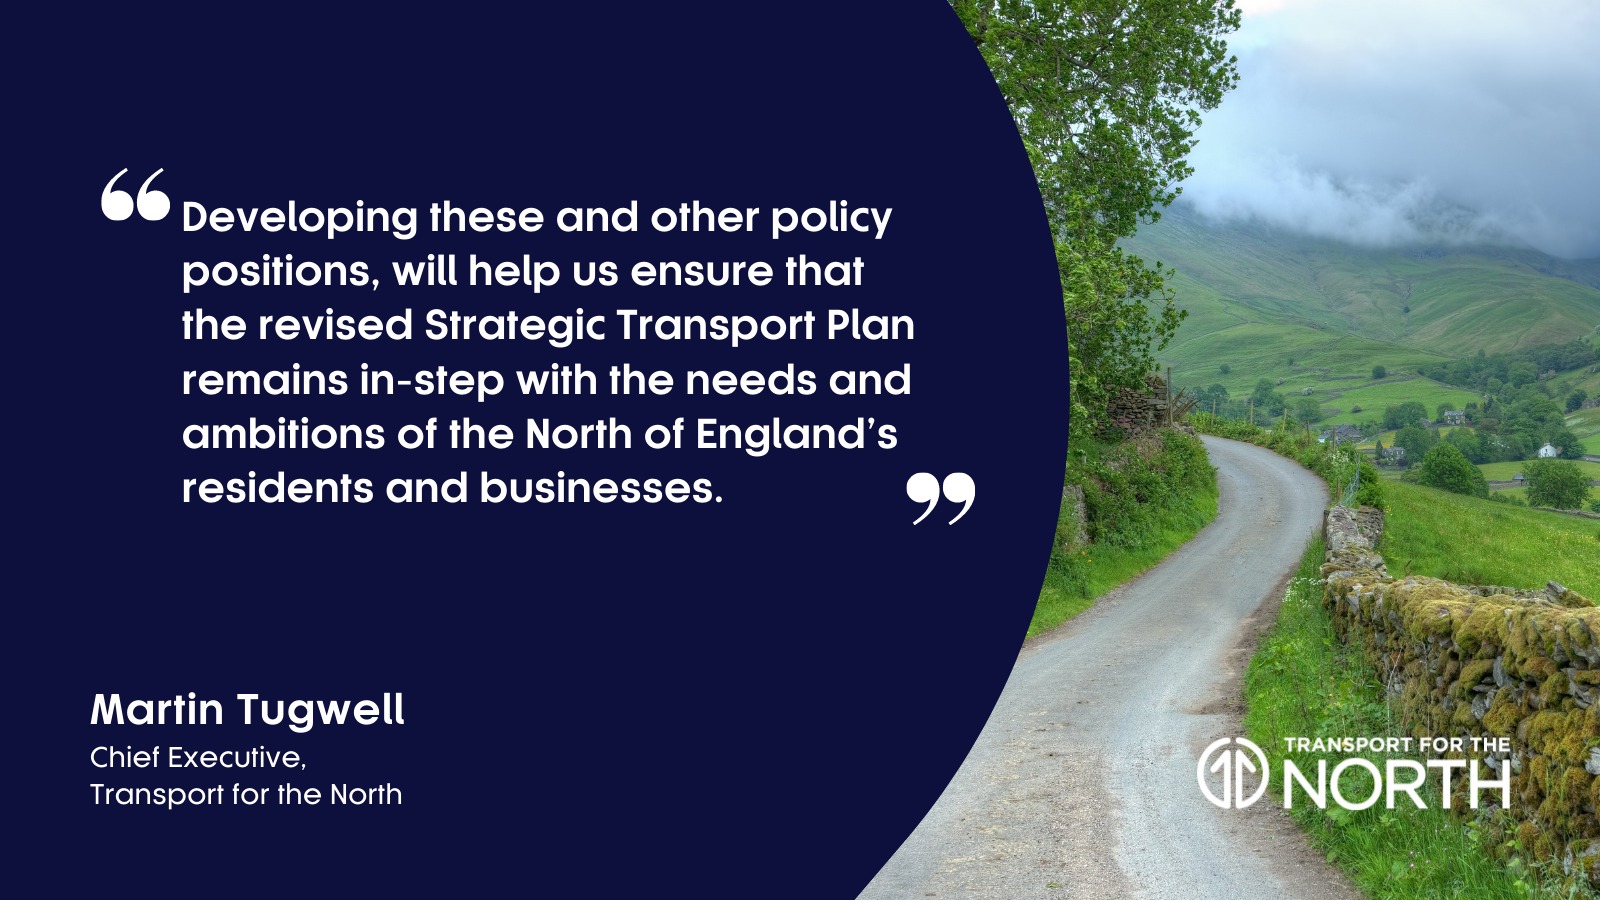 spatial planning and rural mobility quote MT